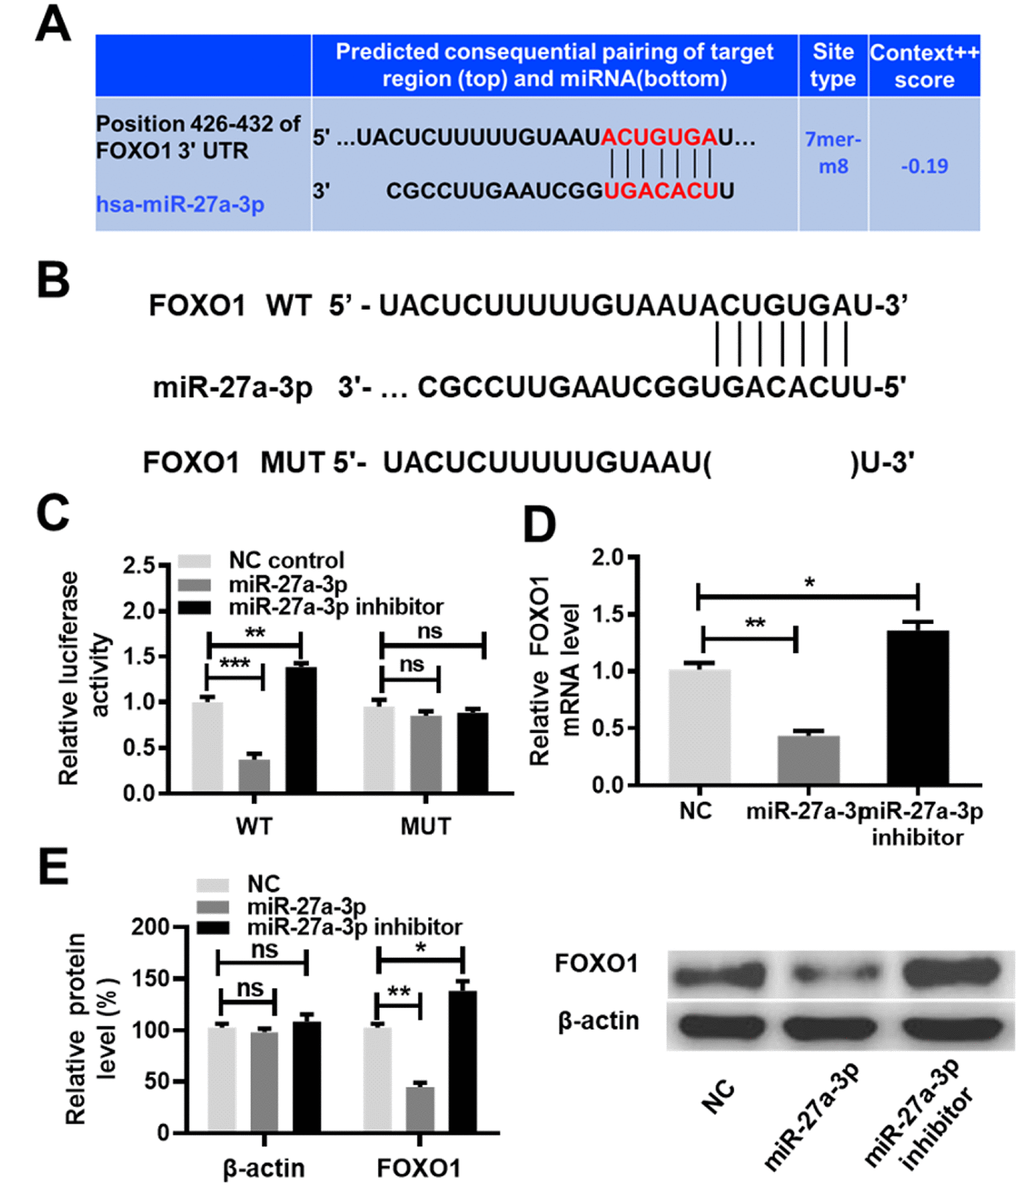 MiR-27a-3p targets FOXO1 and inhibits its expression. (A) Predicted consequential pairing of the target region (FOXO1 3′UTR) and miR-27a-3p from TargetScan (http://www.targetscan.org/vert